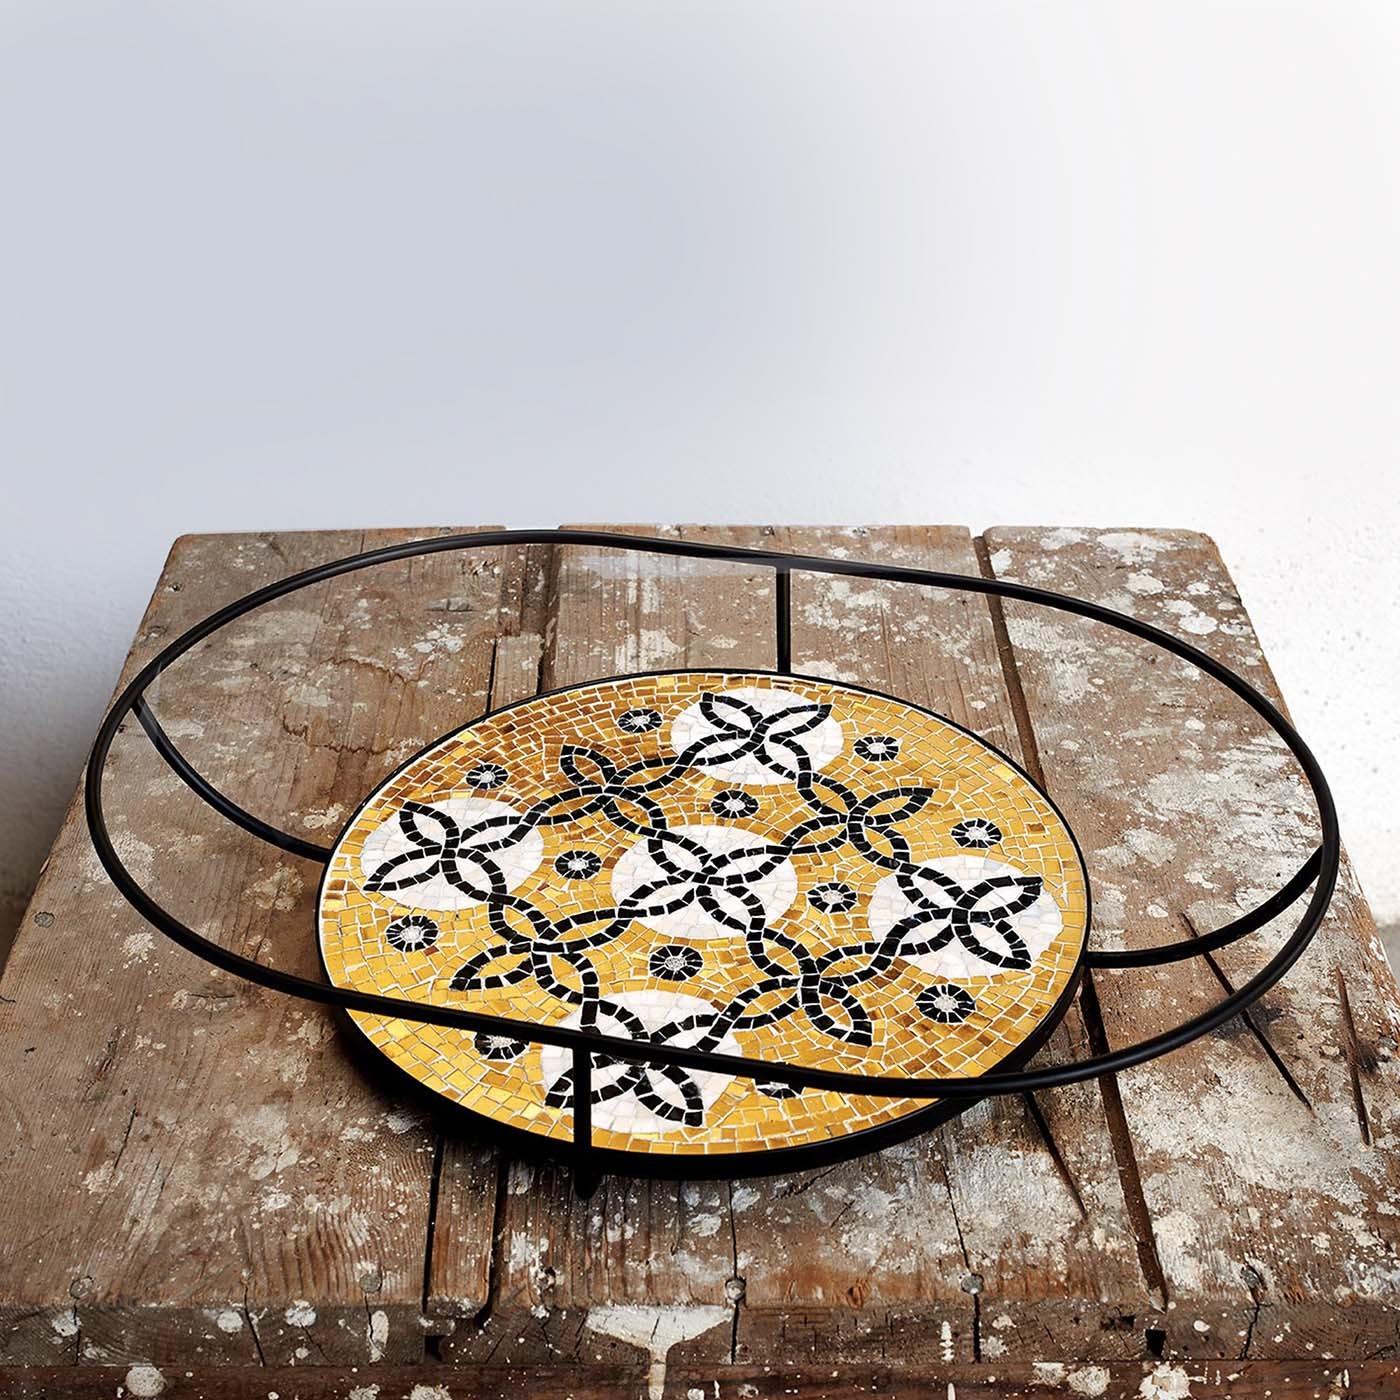 Part of the Flore collection, created by Ursula Corsi along with designer Davide Acquini, the central decoration of this tray is a magnificent marble tile mosaic that interprets some of the inlays found in Basilica di Santa Maria del Fiore in